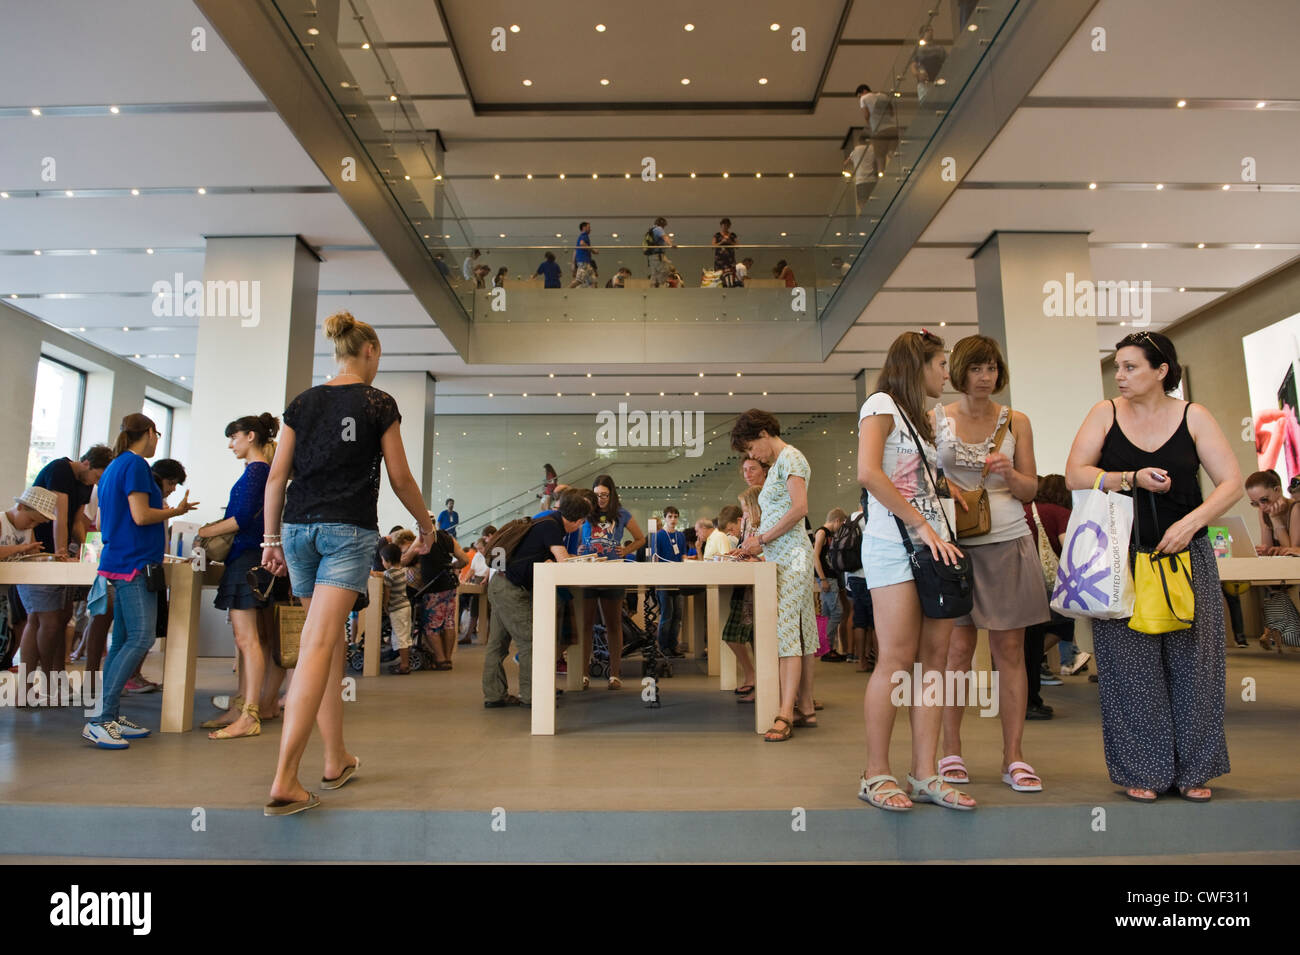 Interior of the Apple Store with customers browsing laptops, ipads and iphones in Barcelona, Catalonia, Spain, ES Stock Photo